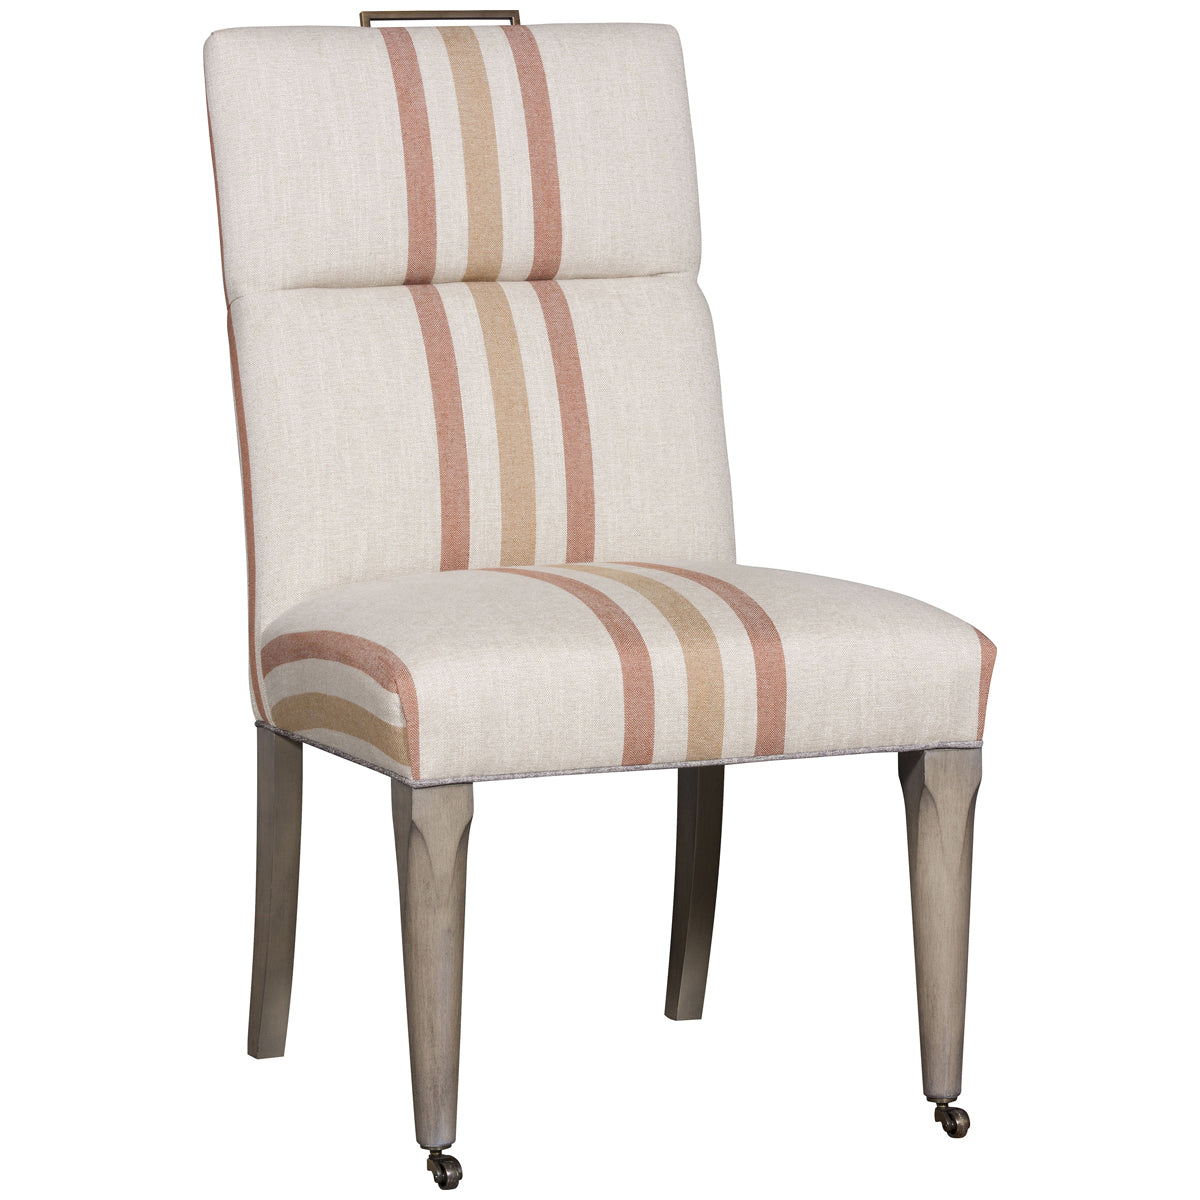 Vanguard Furniture Brattle Road Side Chair with Caster